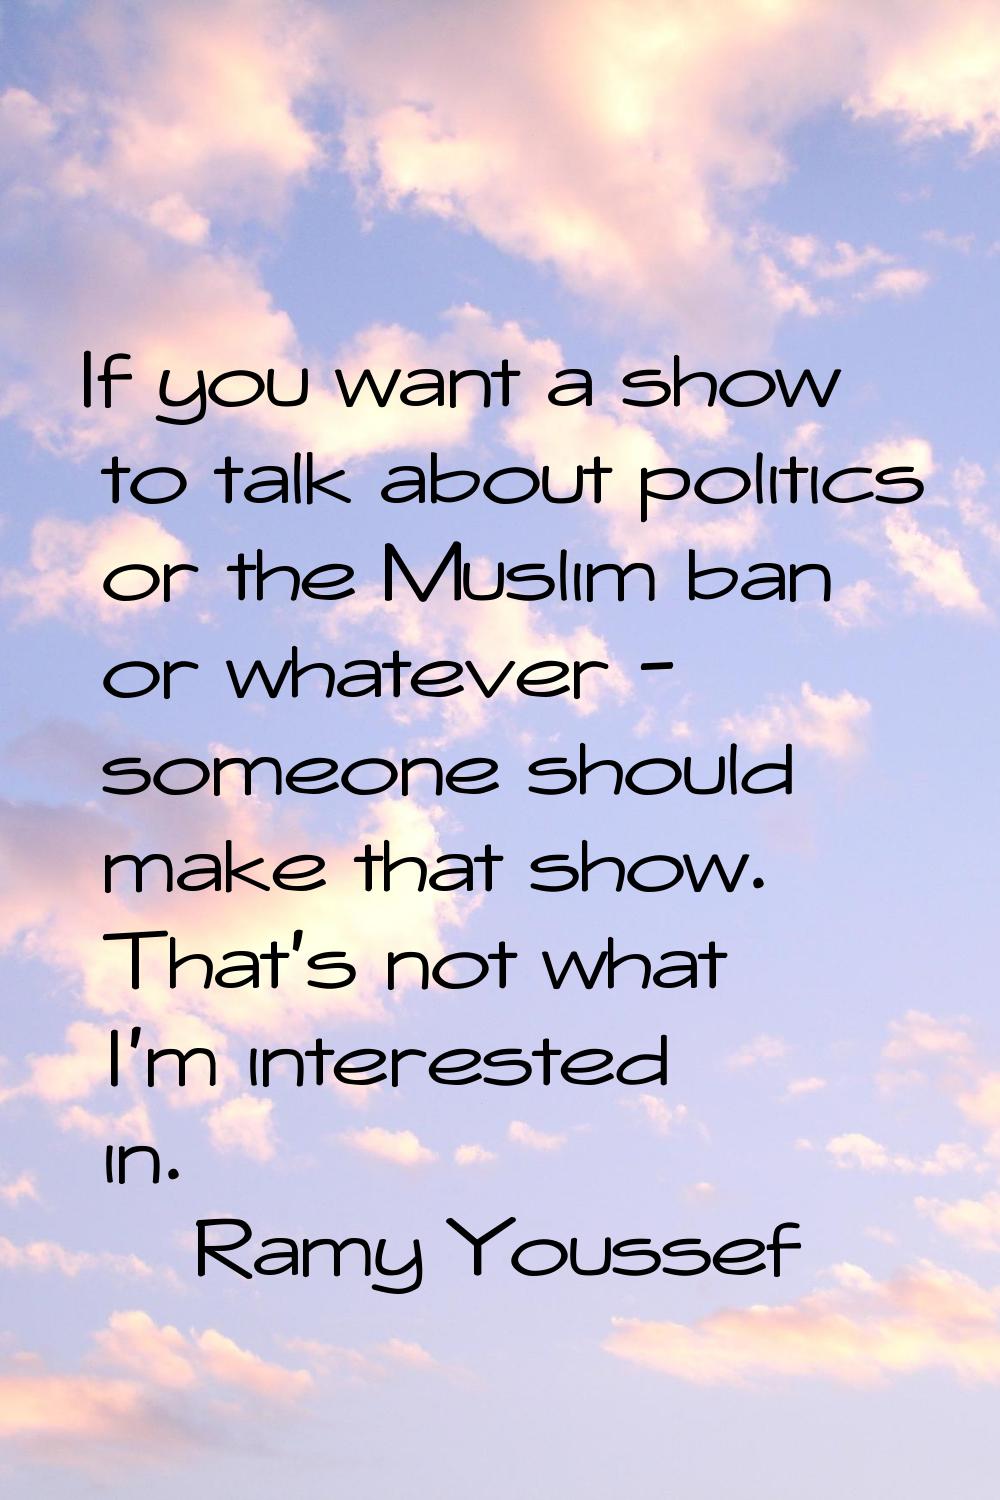 If you want a show to talk about politics or the Muslim ban or whatever - someone should make that 